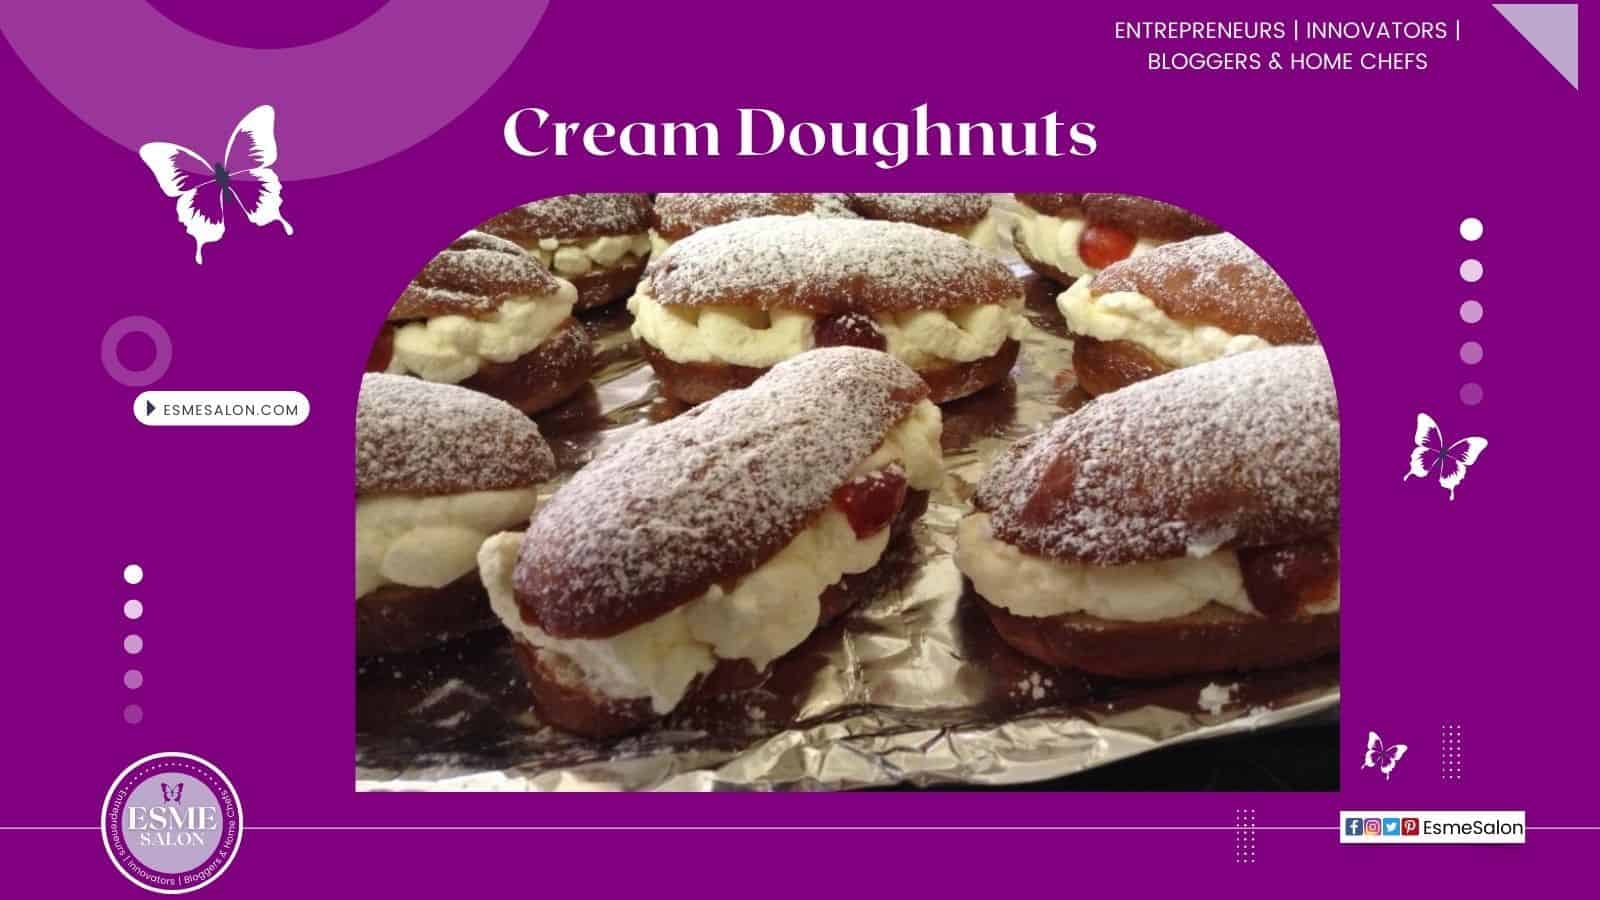 An image of a silver platter filled with Cream Doughnuts with cherries